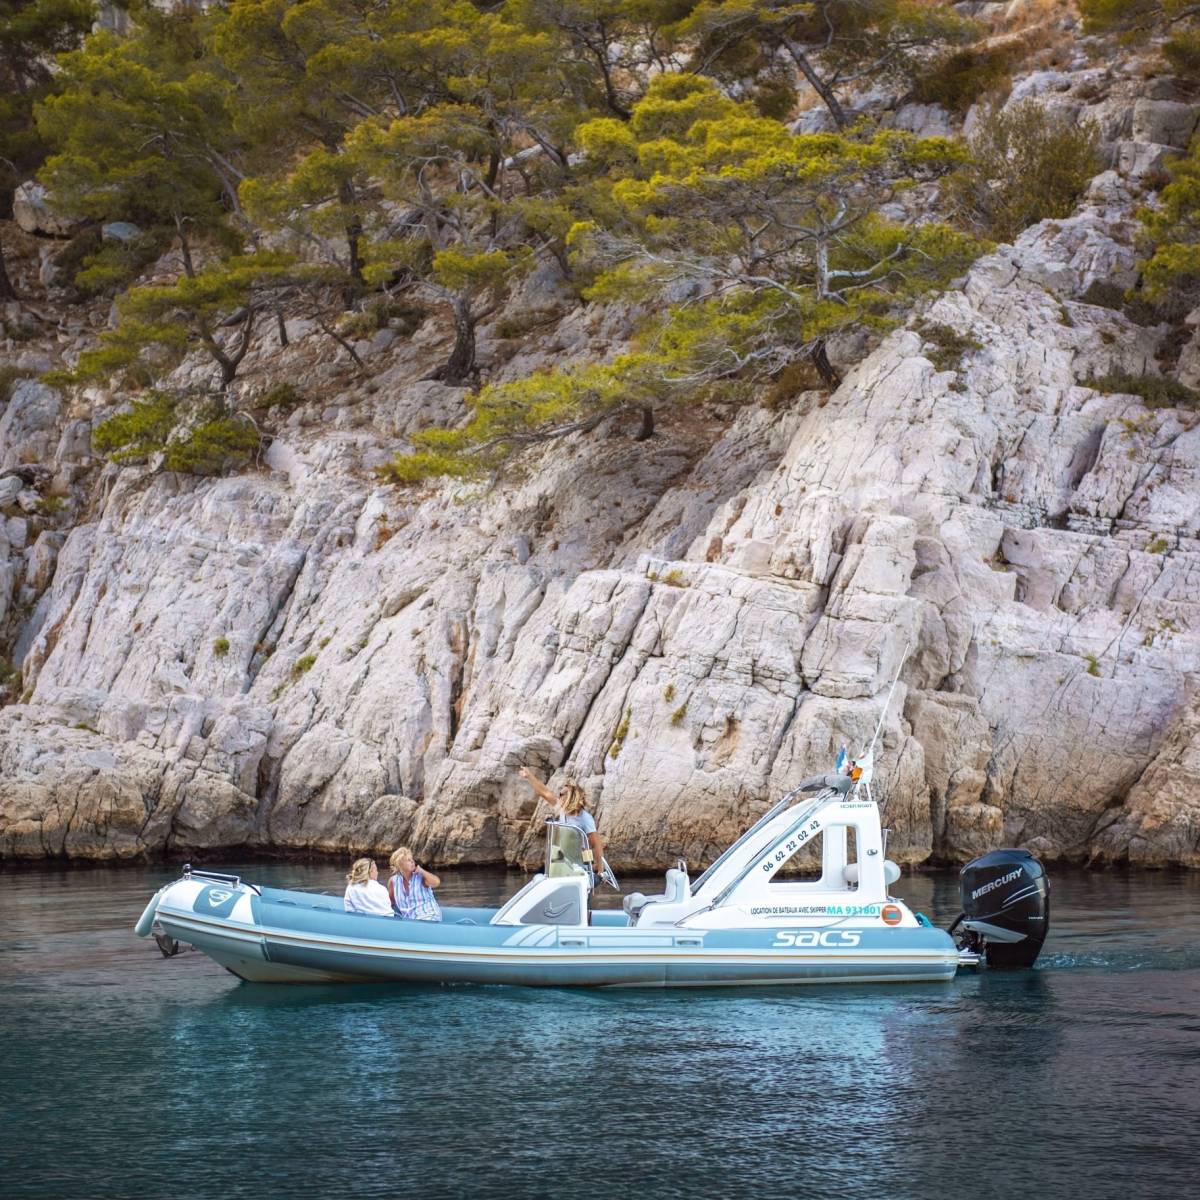 Discover the French Calanques on your own terms with L'Eden Boat's individual boat reservations!